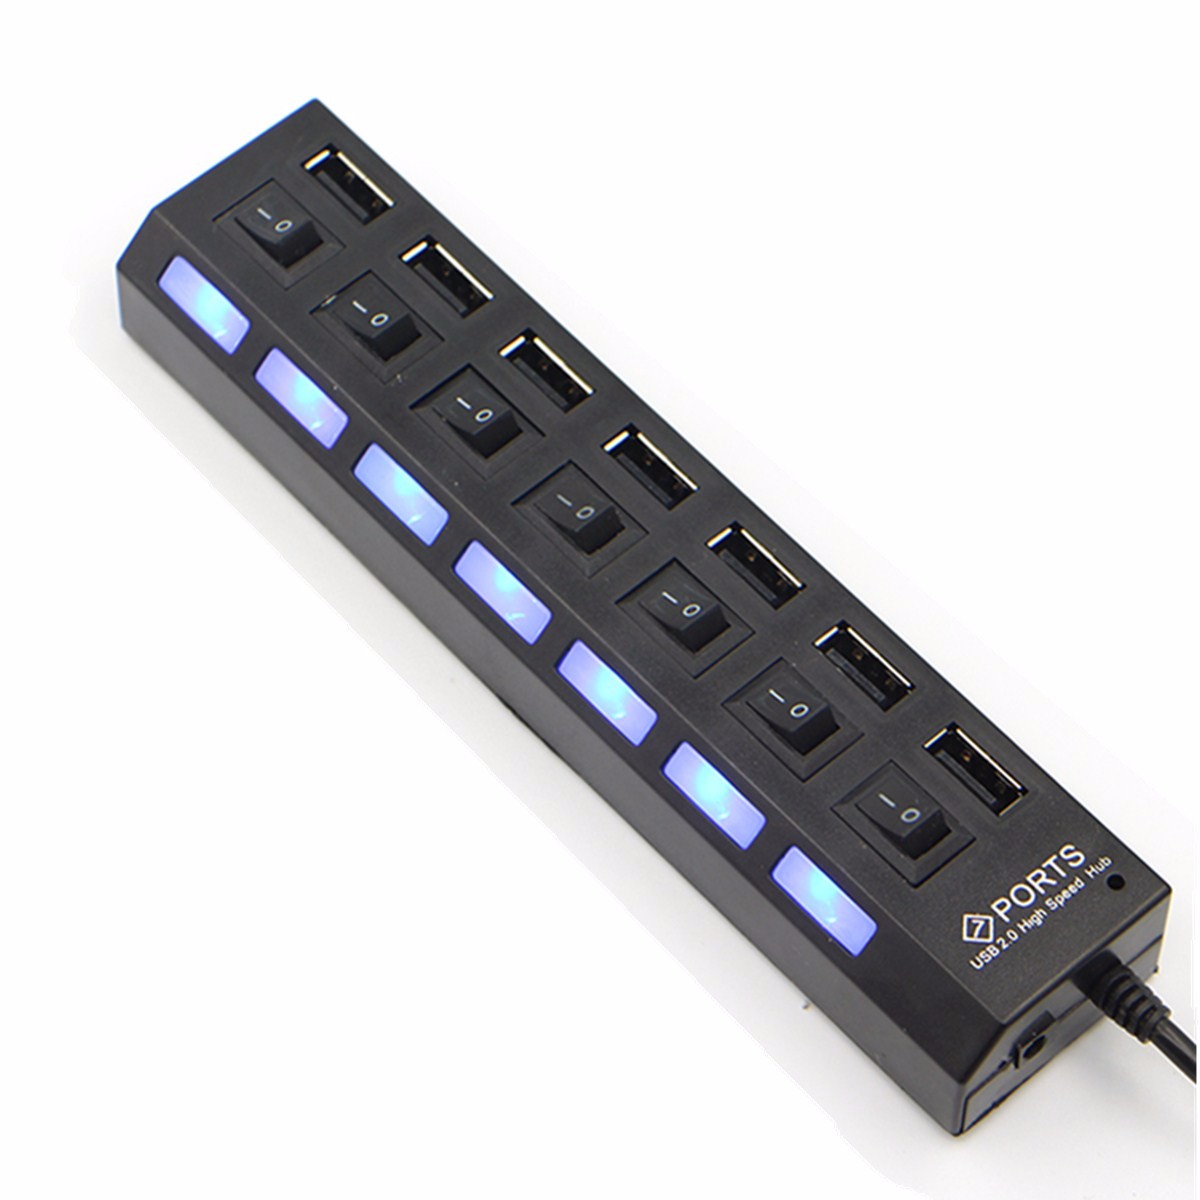 7-Port-High-Speed-USB-20-Hub---Power-Adapter-ONOFF-for-Switch-for-MAC-PC-Laptop-1762543